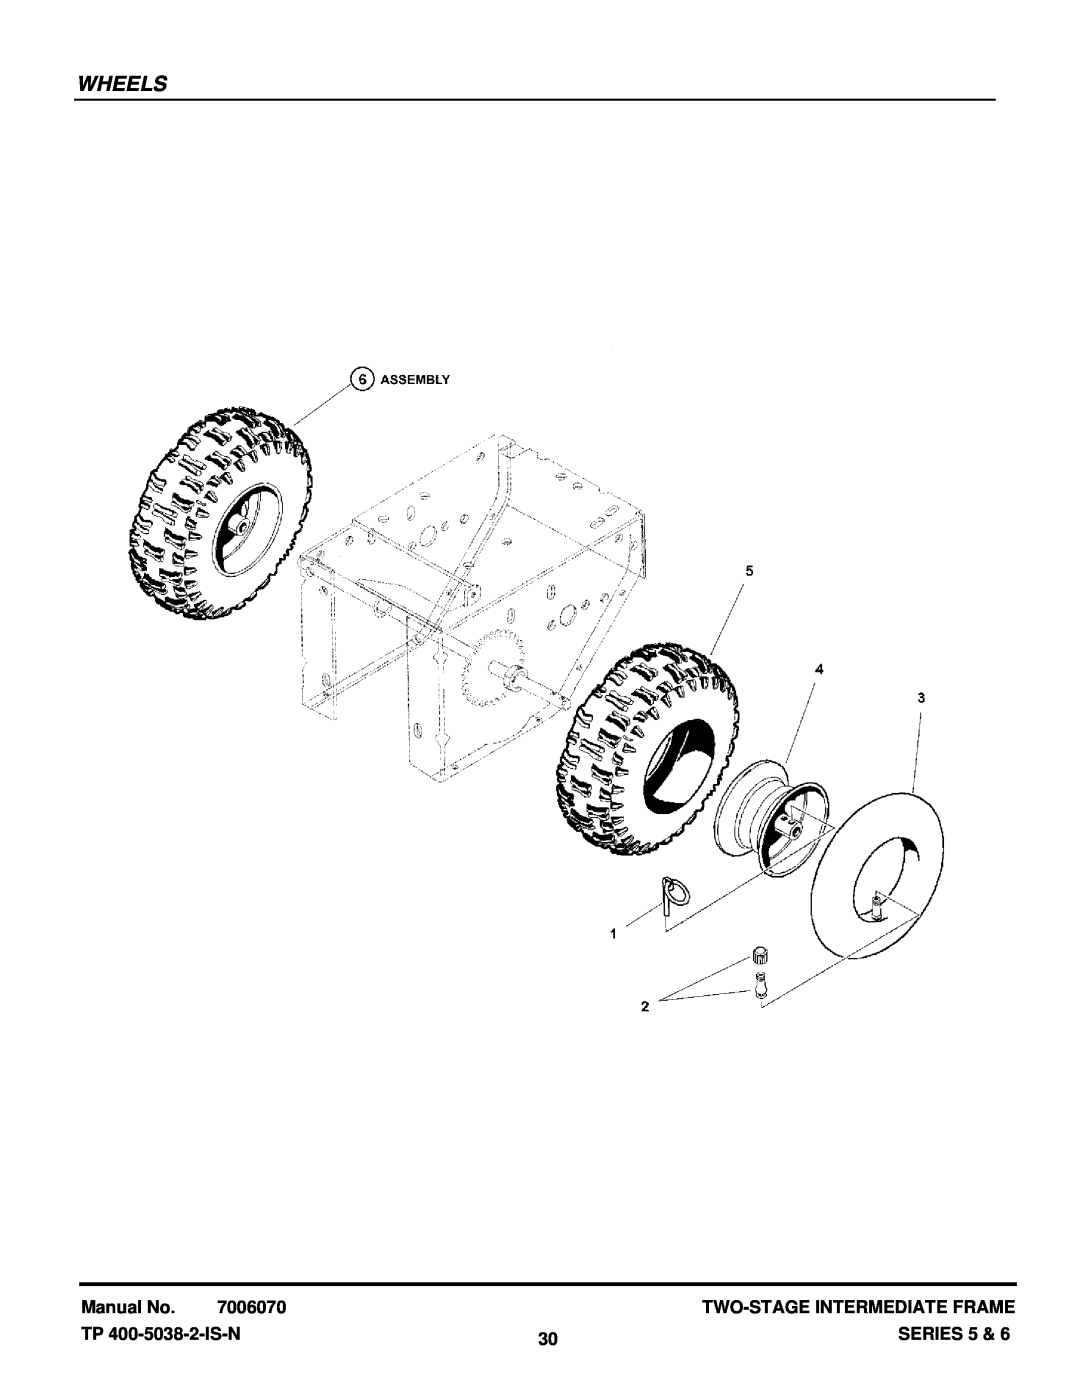 Snapper EI75225, I85245E manual Wheels, Manual No, 7006070, Two-Stage Intermediate Frame, TP 400-5038-2-IS-N, Series 